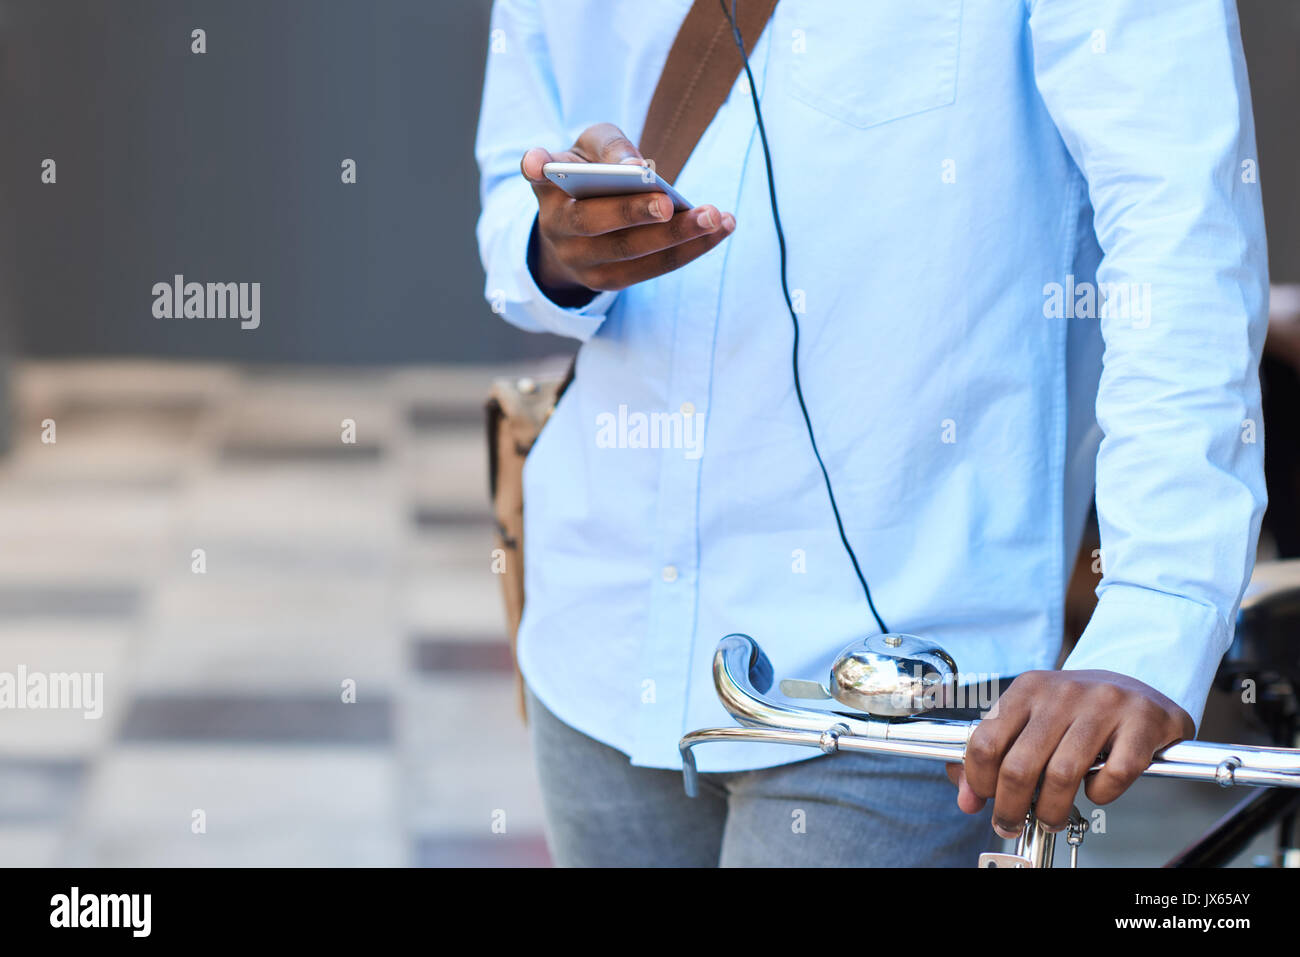 Closeup of a man with his bike using a cellphone Stock Photo